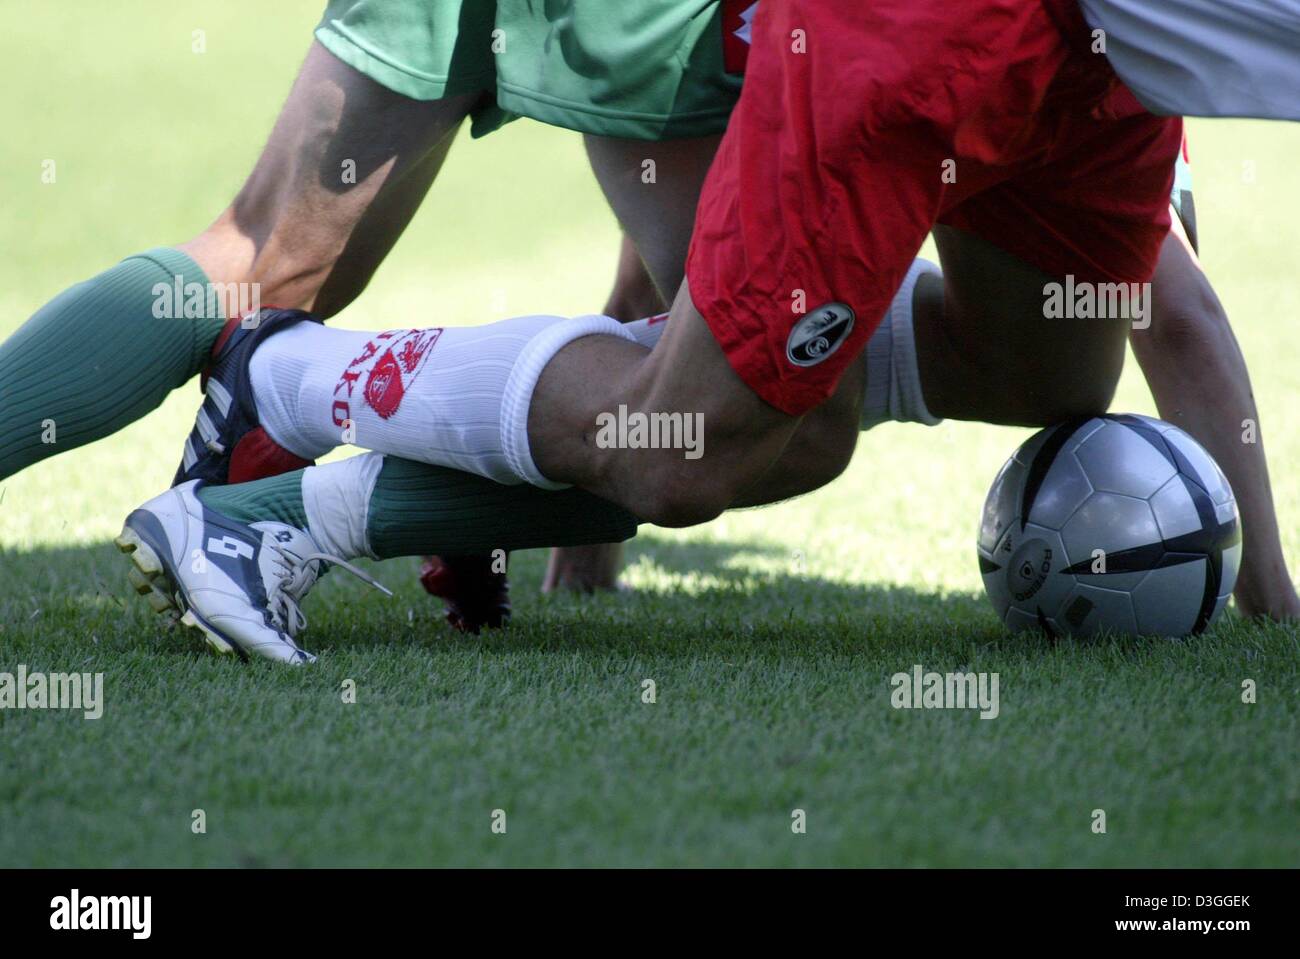 (dpa) - The legs of two soccer players get tangled up in a fight for the ball in a German Bundesliga match between SC Freiburg and Borussia Moenchengladbach at Badenova Stadium in Freiburg, Germany, 28 August 2004. Stock Photo